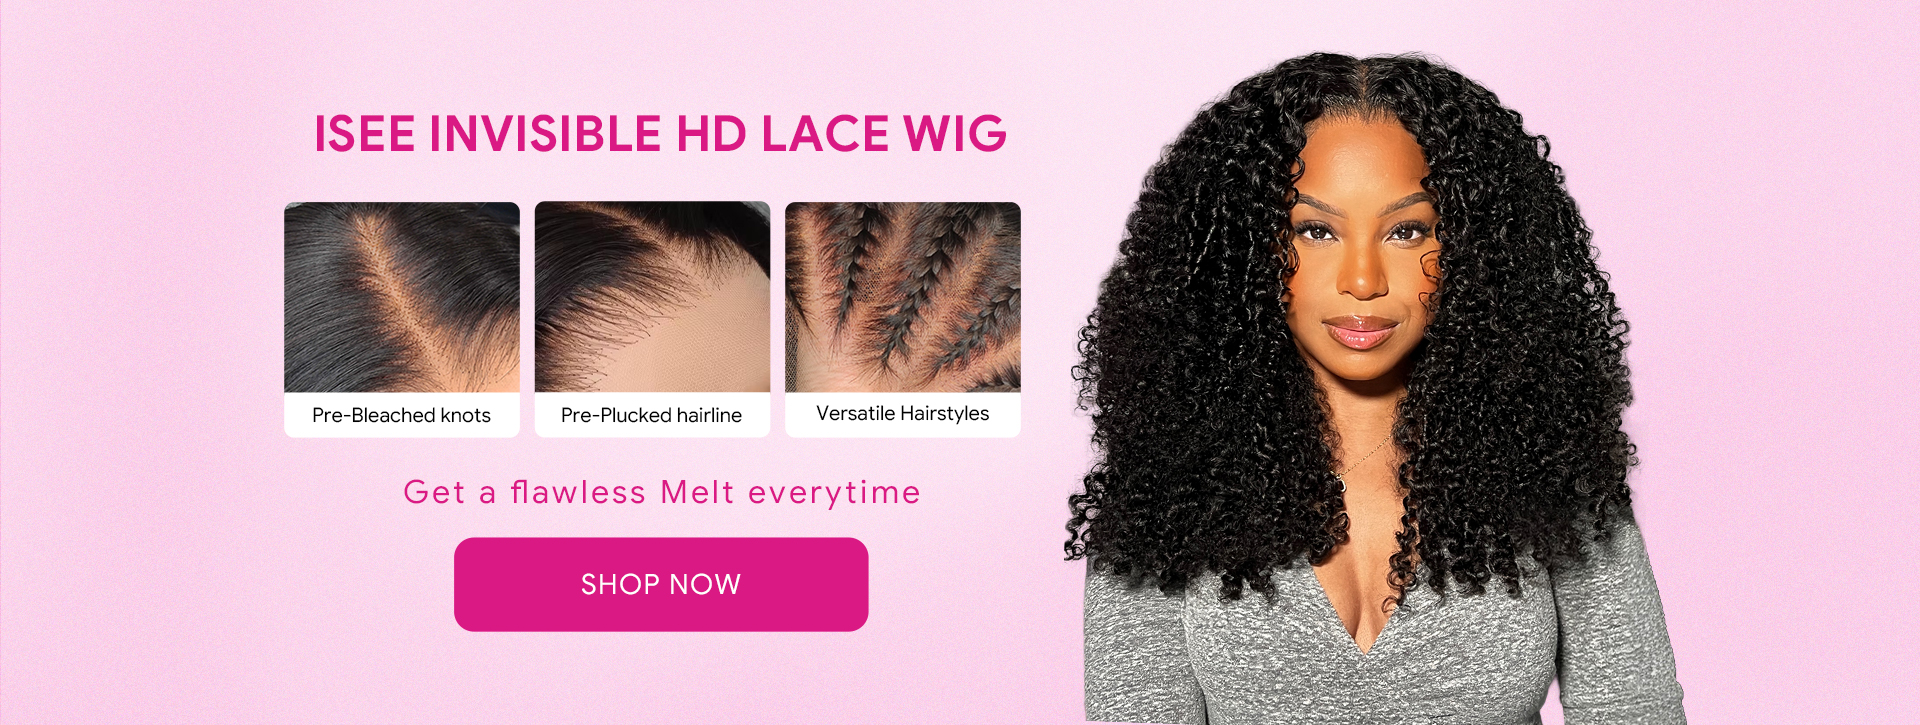 ISEE Easter Day Sale HD Lace Wig